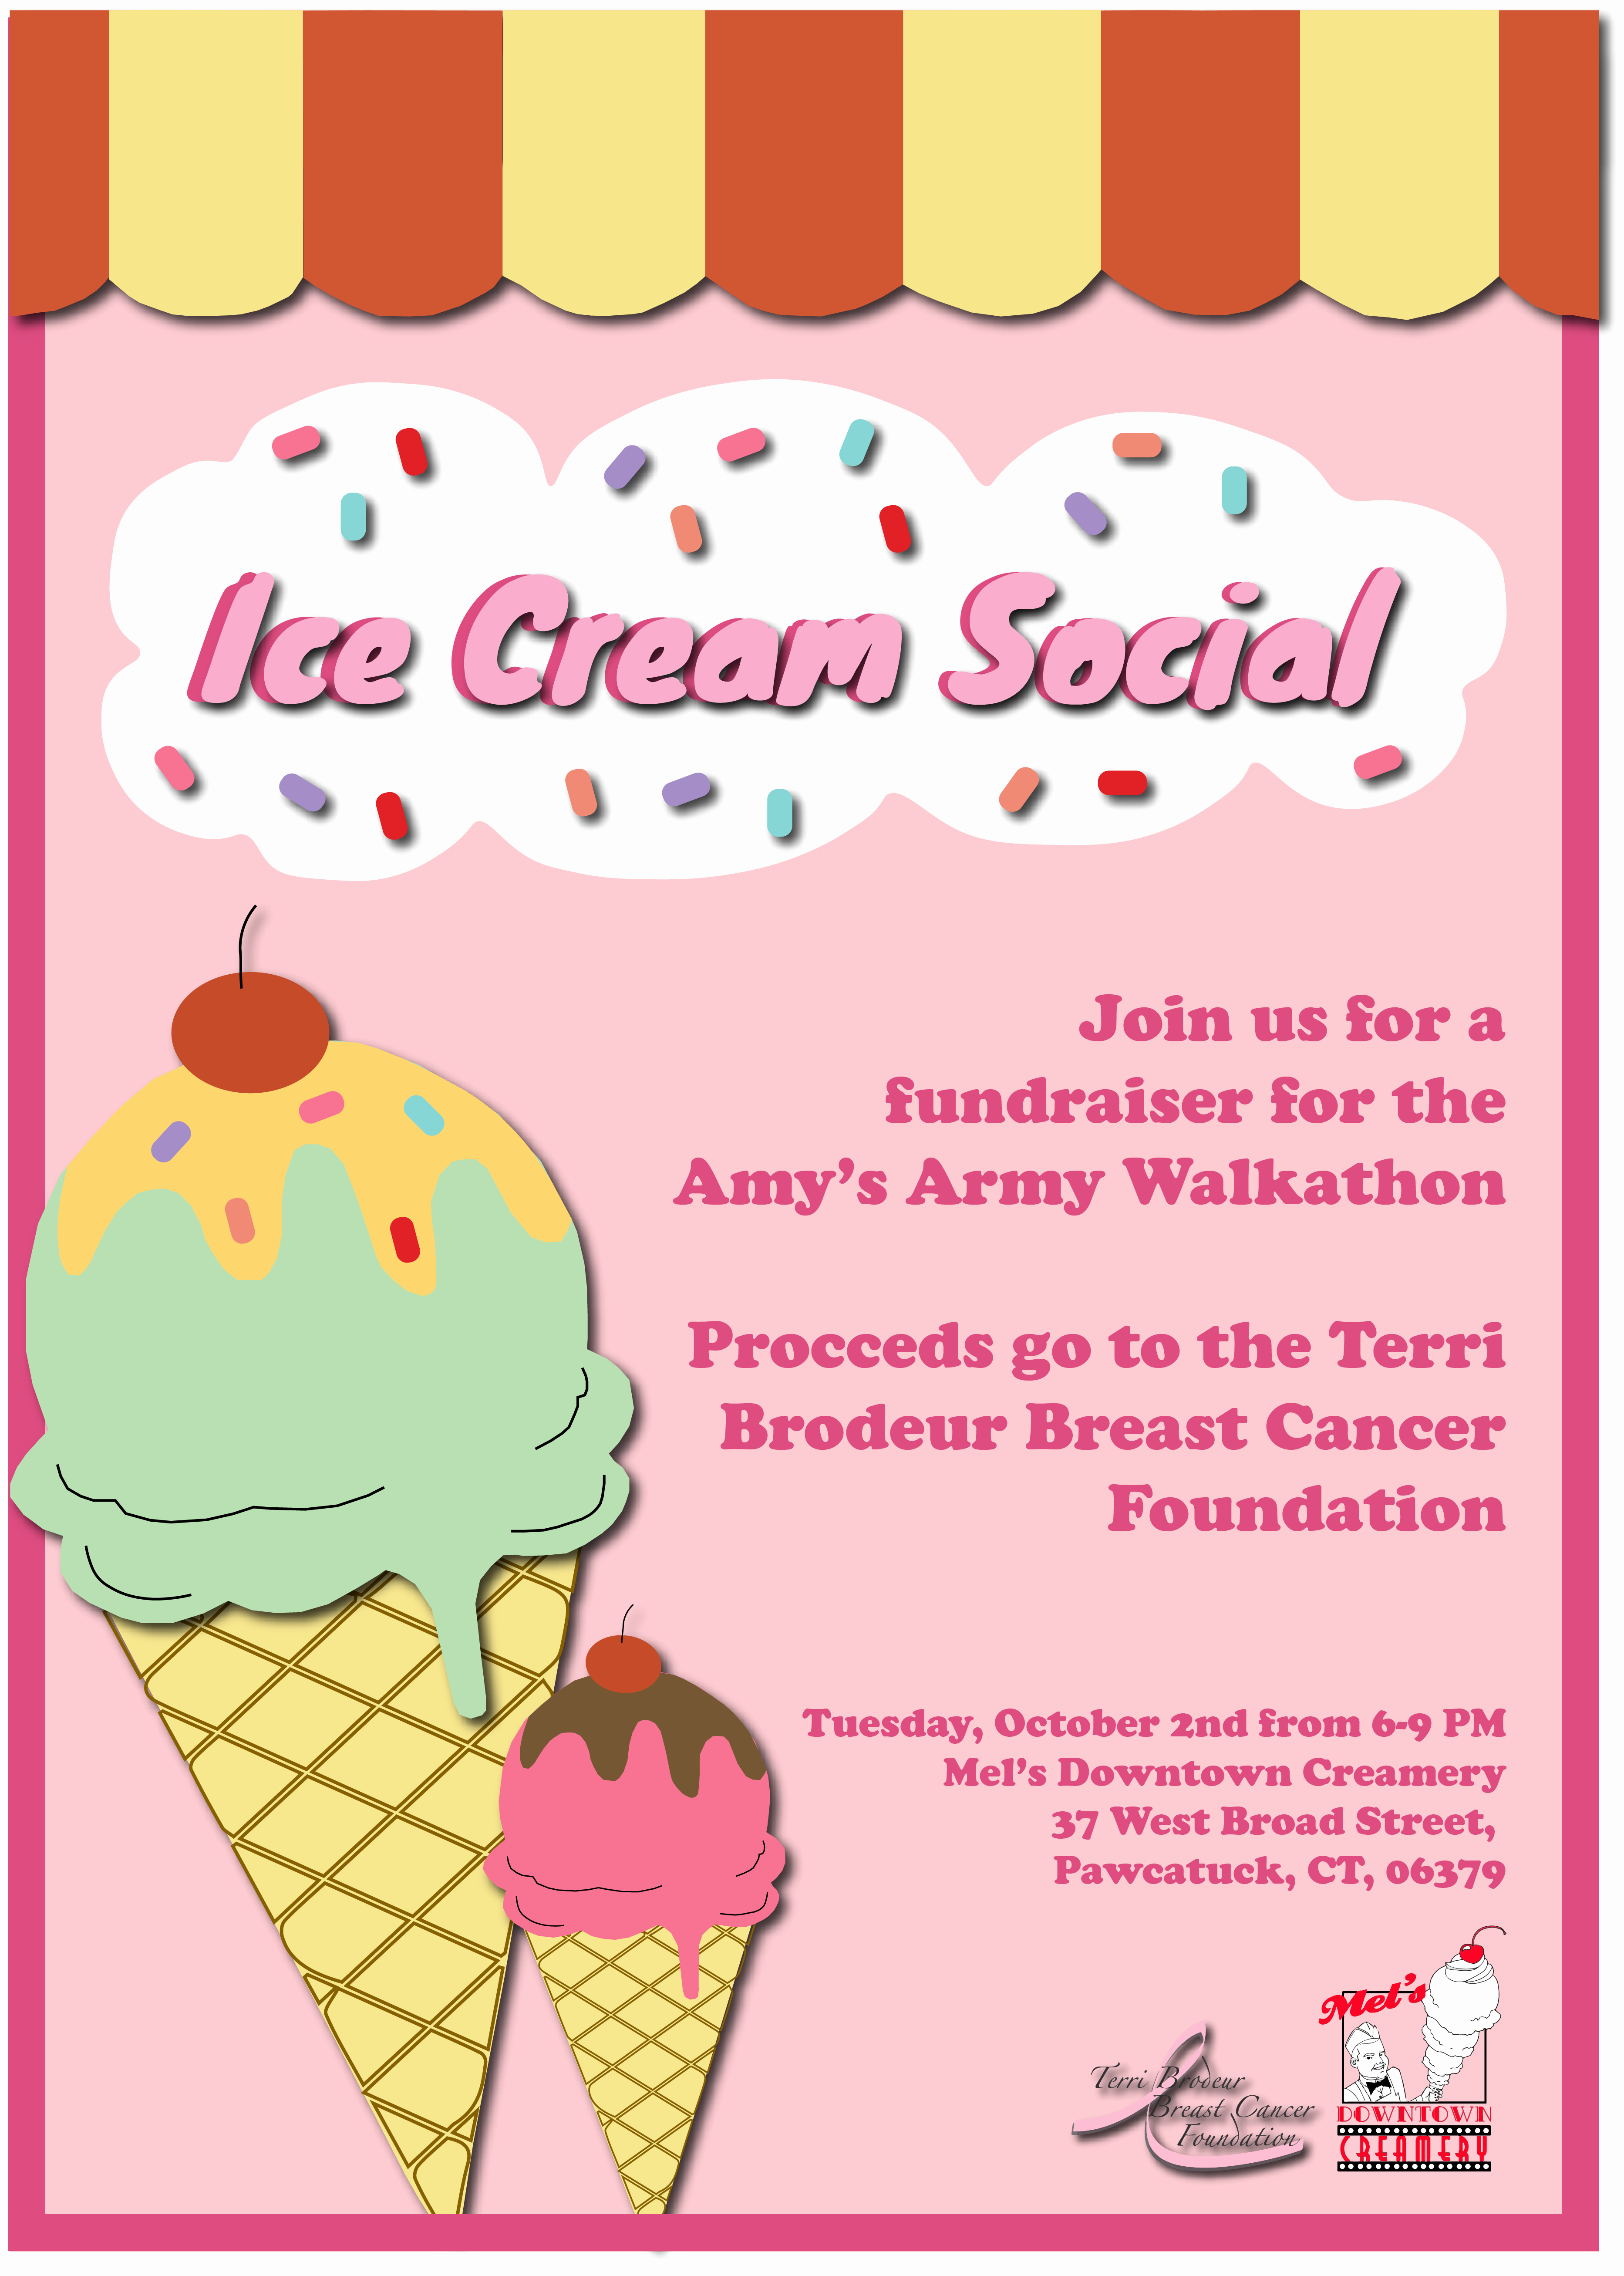 Ice Cream social Flyer Template Free Awesome Ice Cream social Flyer Terri Brodeur Breast Cancer